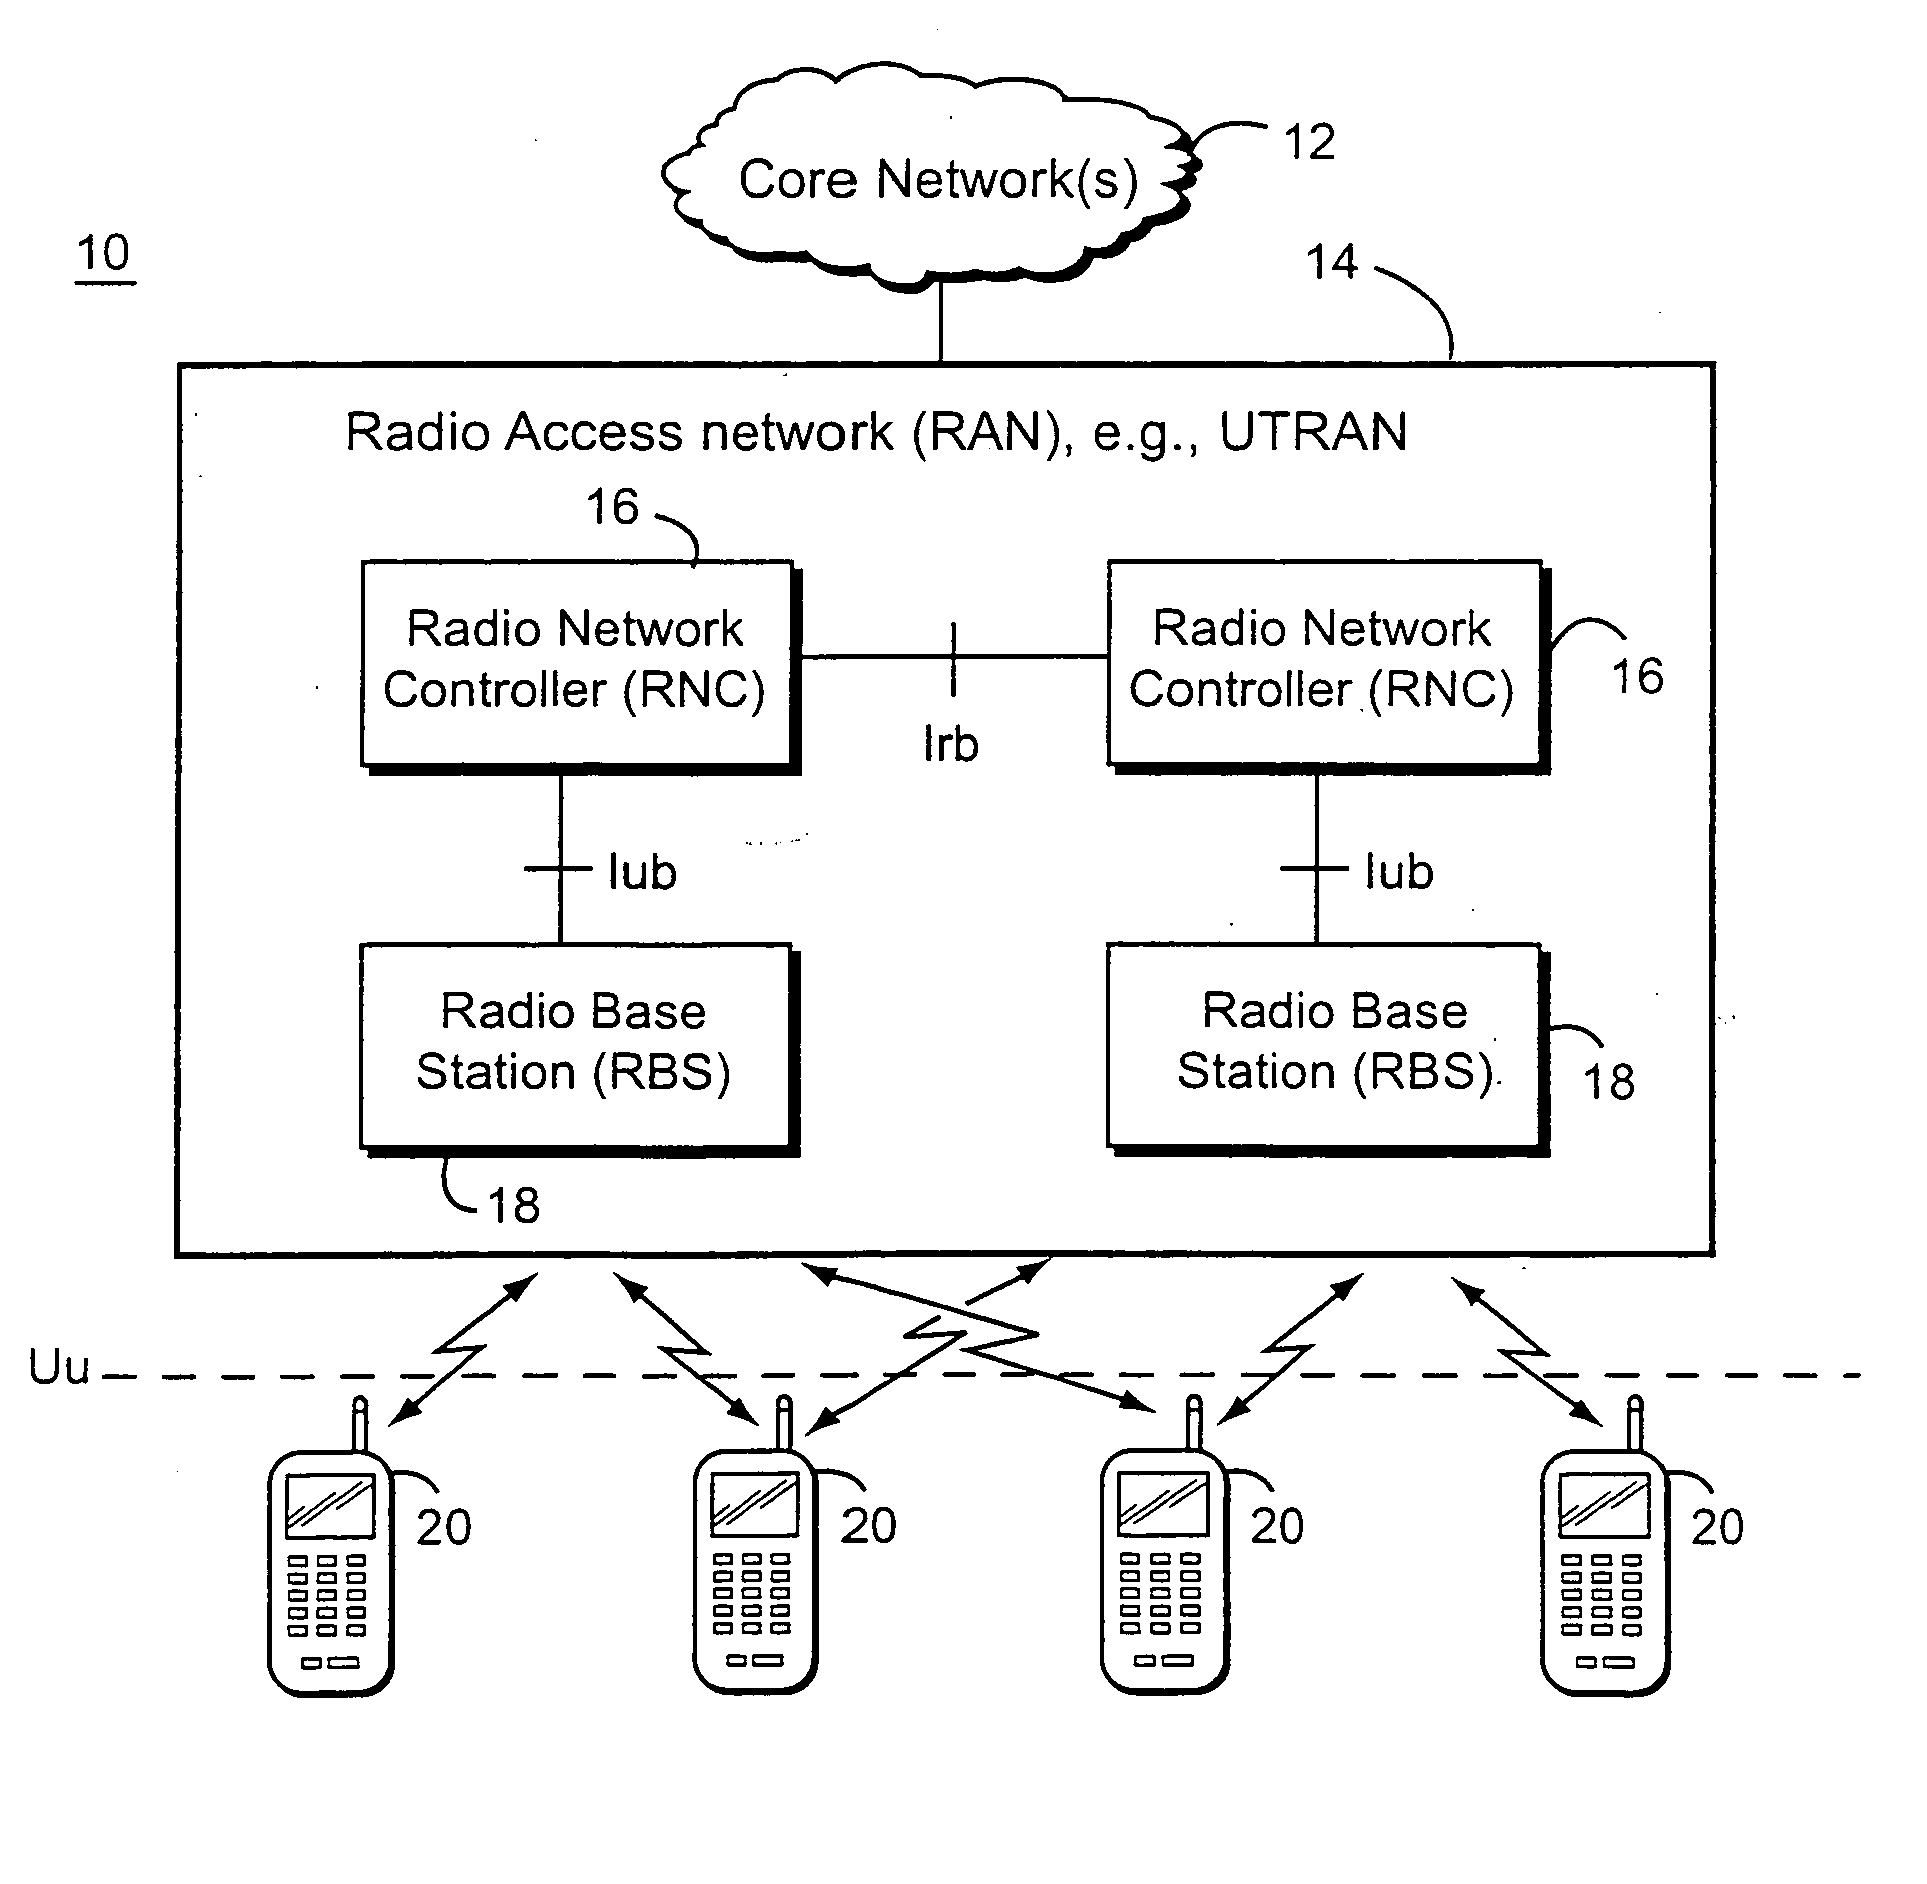 Uplink congestion detection and control between nodes in a radio access network